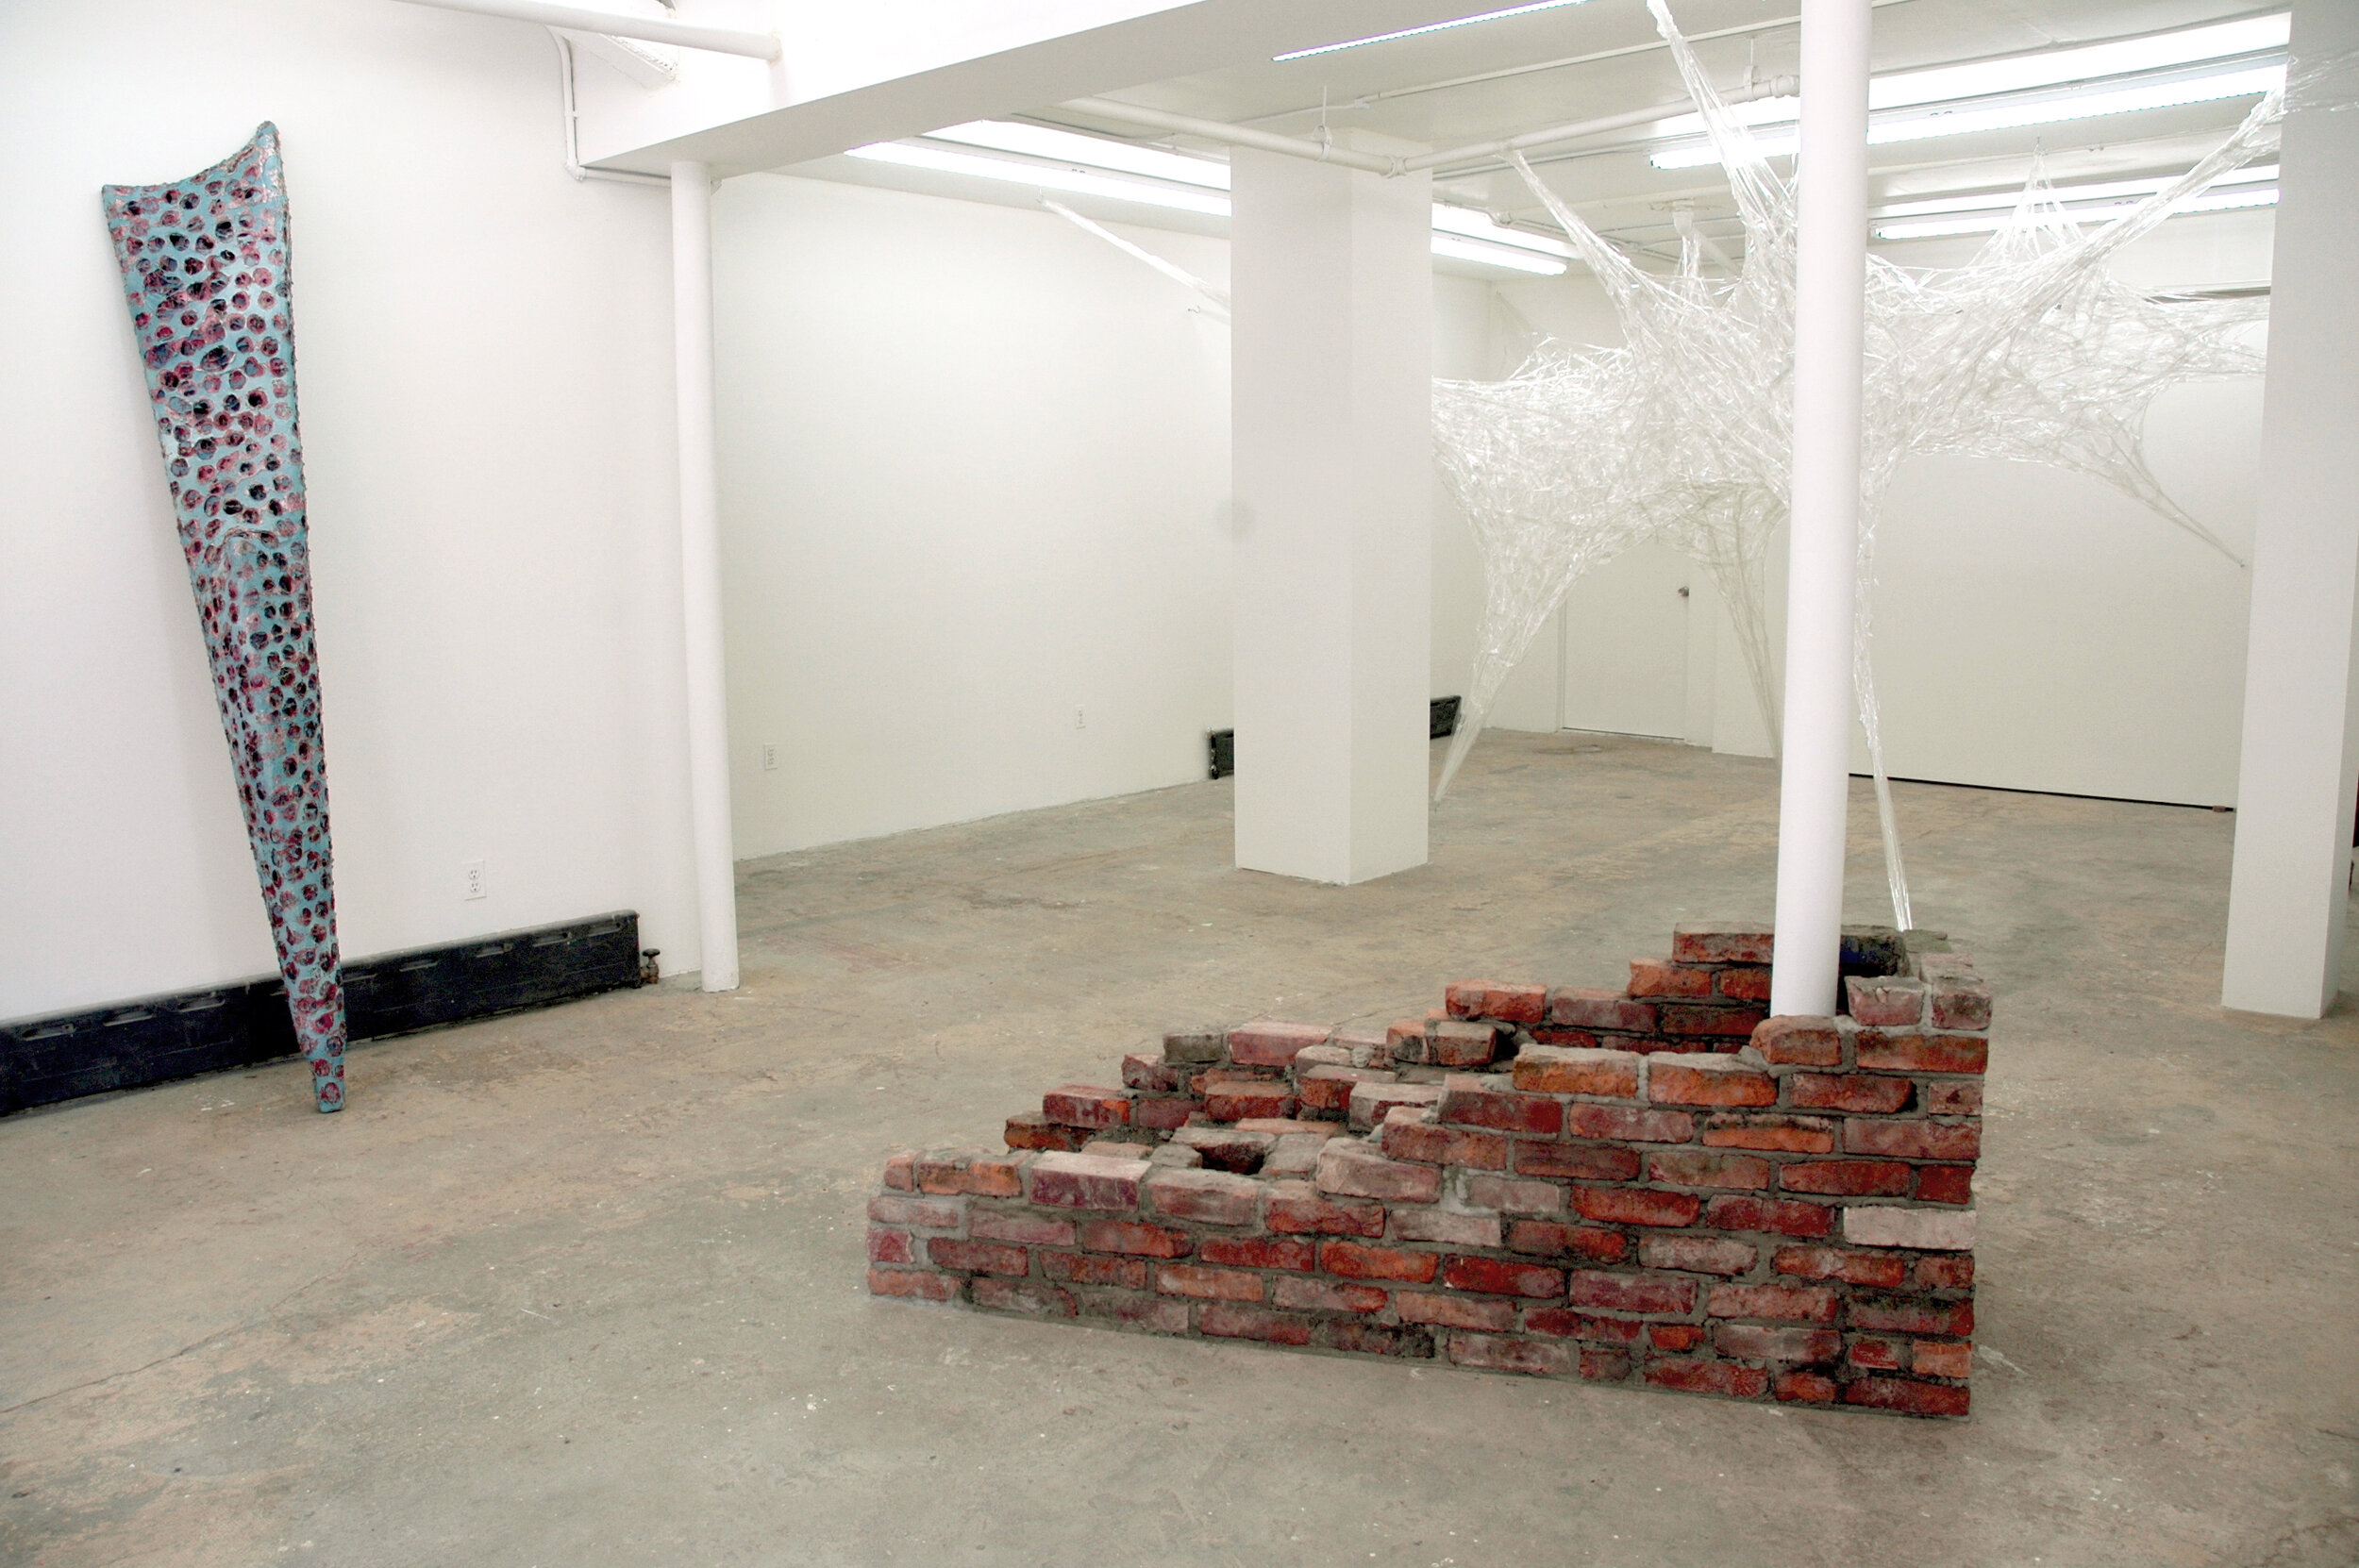 Installation image from the 2012 Gereon Krebber exhibition, Contrary Data, at Cindy Rucker Gallery